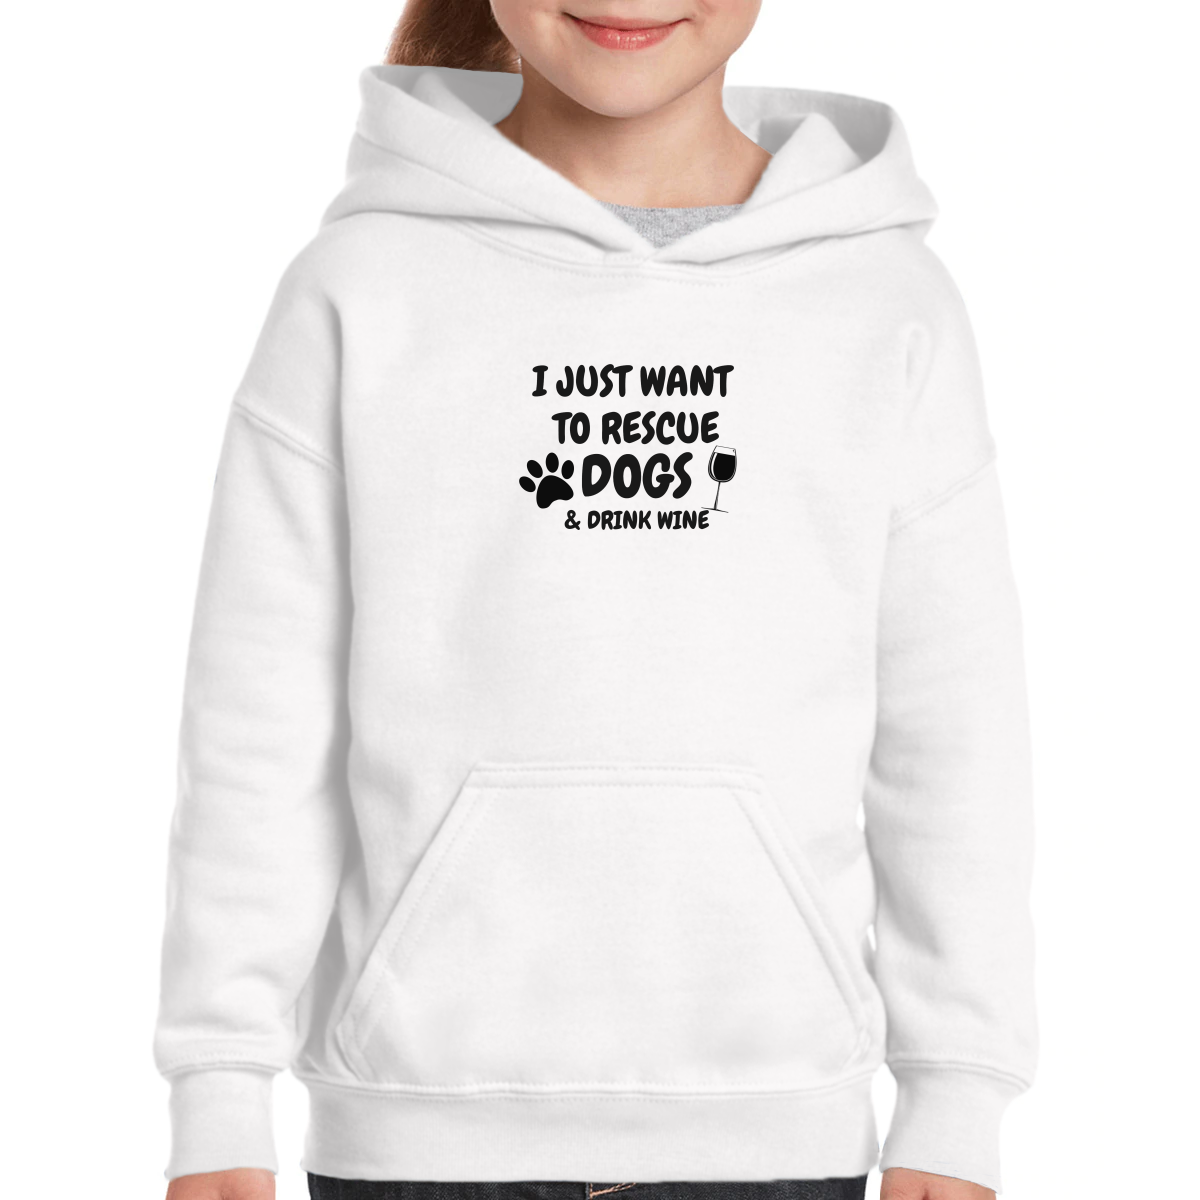 Dogs and Drink Wine Kids Hoodie | White